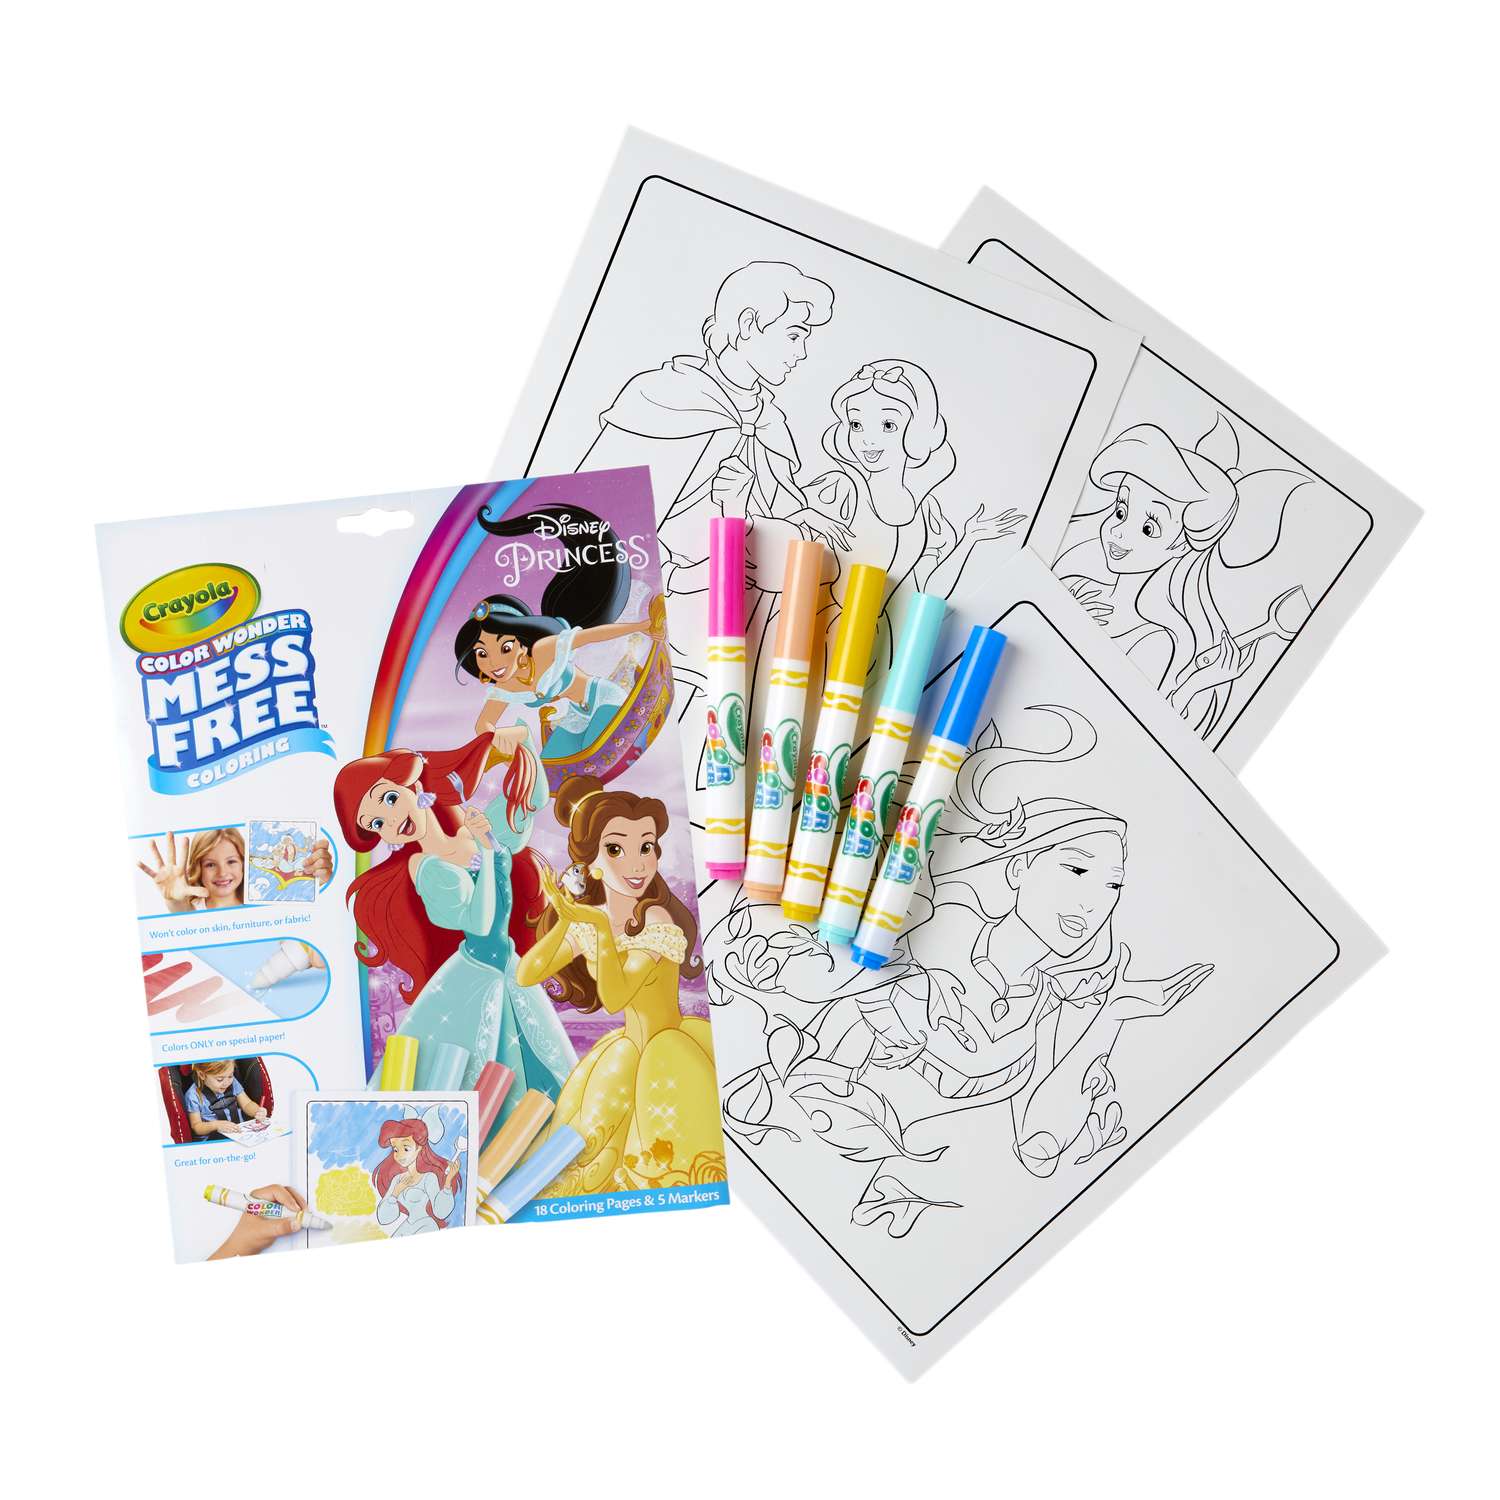 COLOR WONDER DRAWING PAD - THE TOY STORE